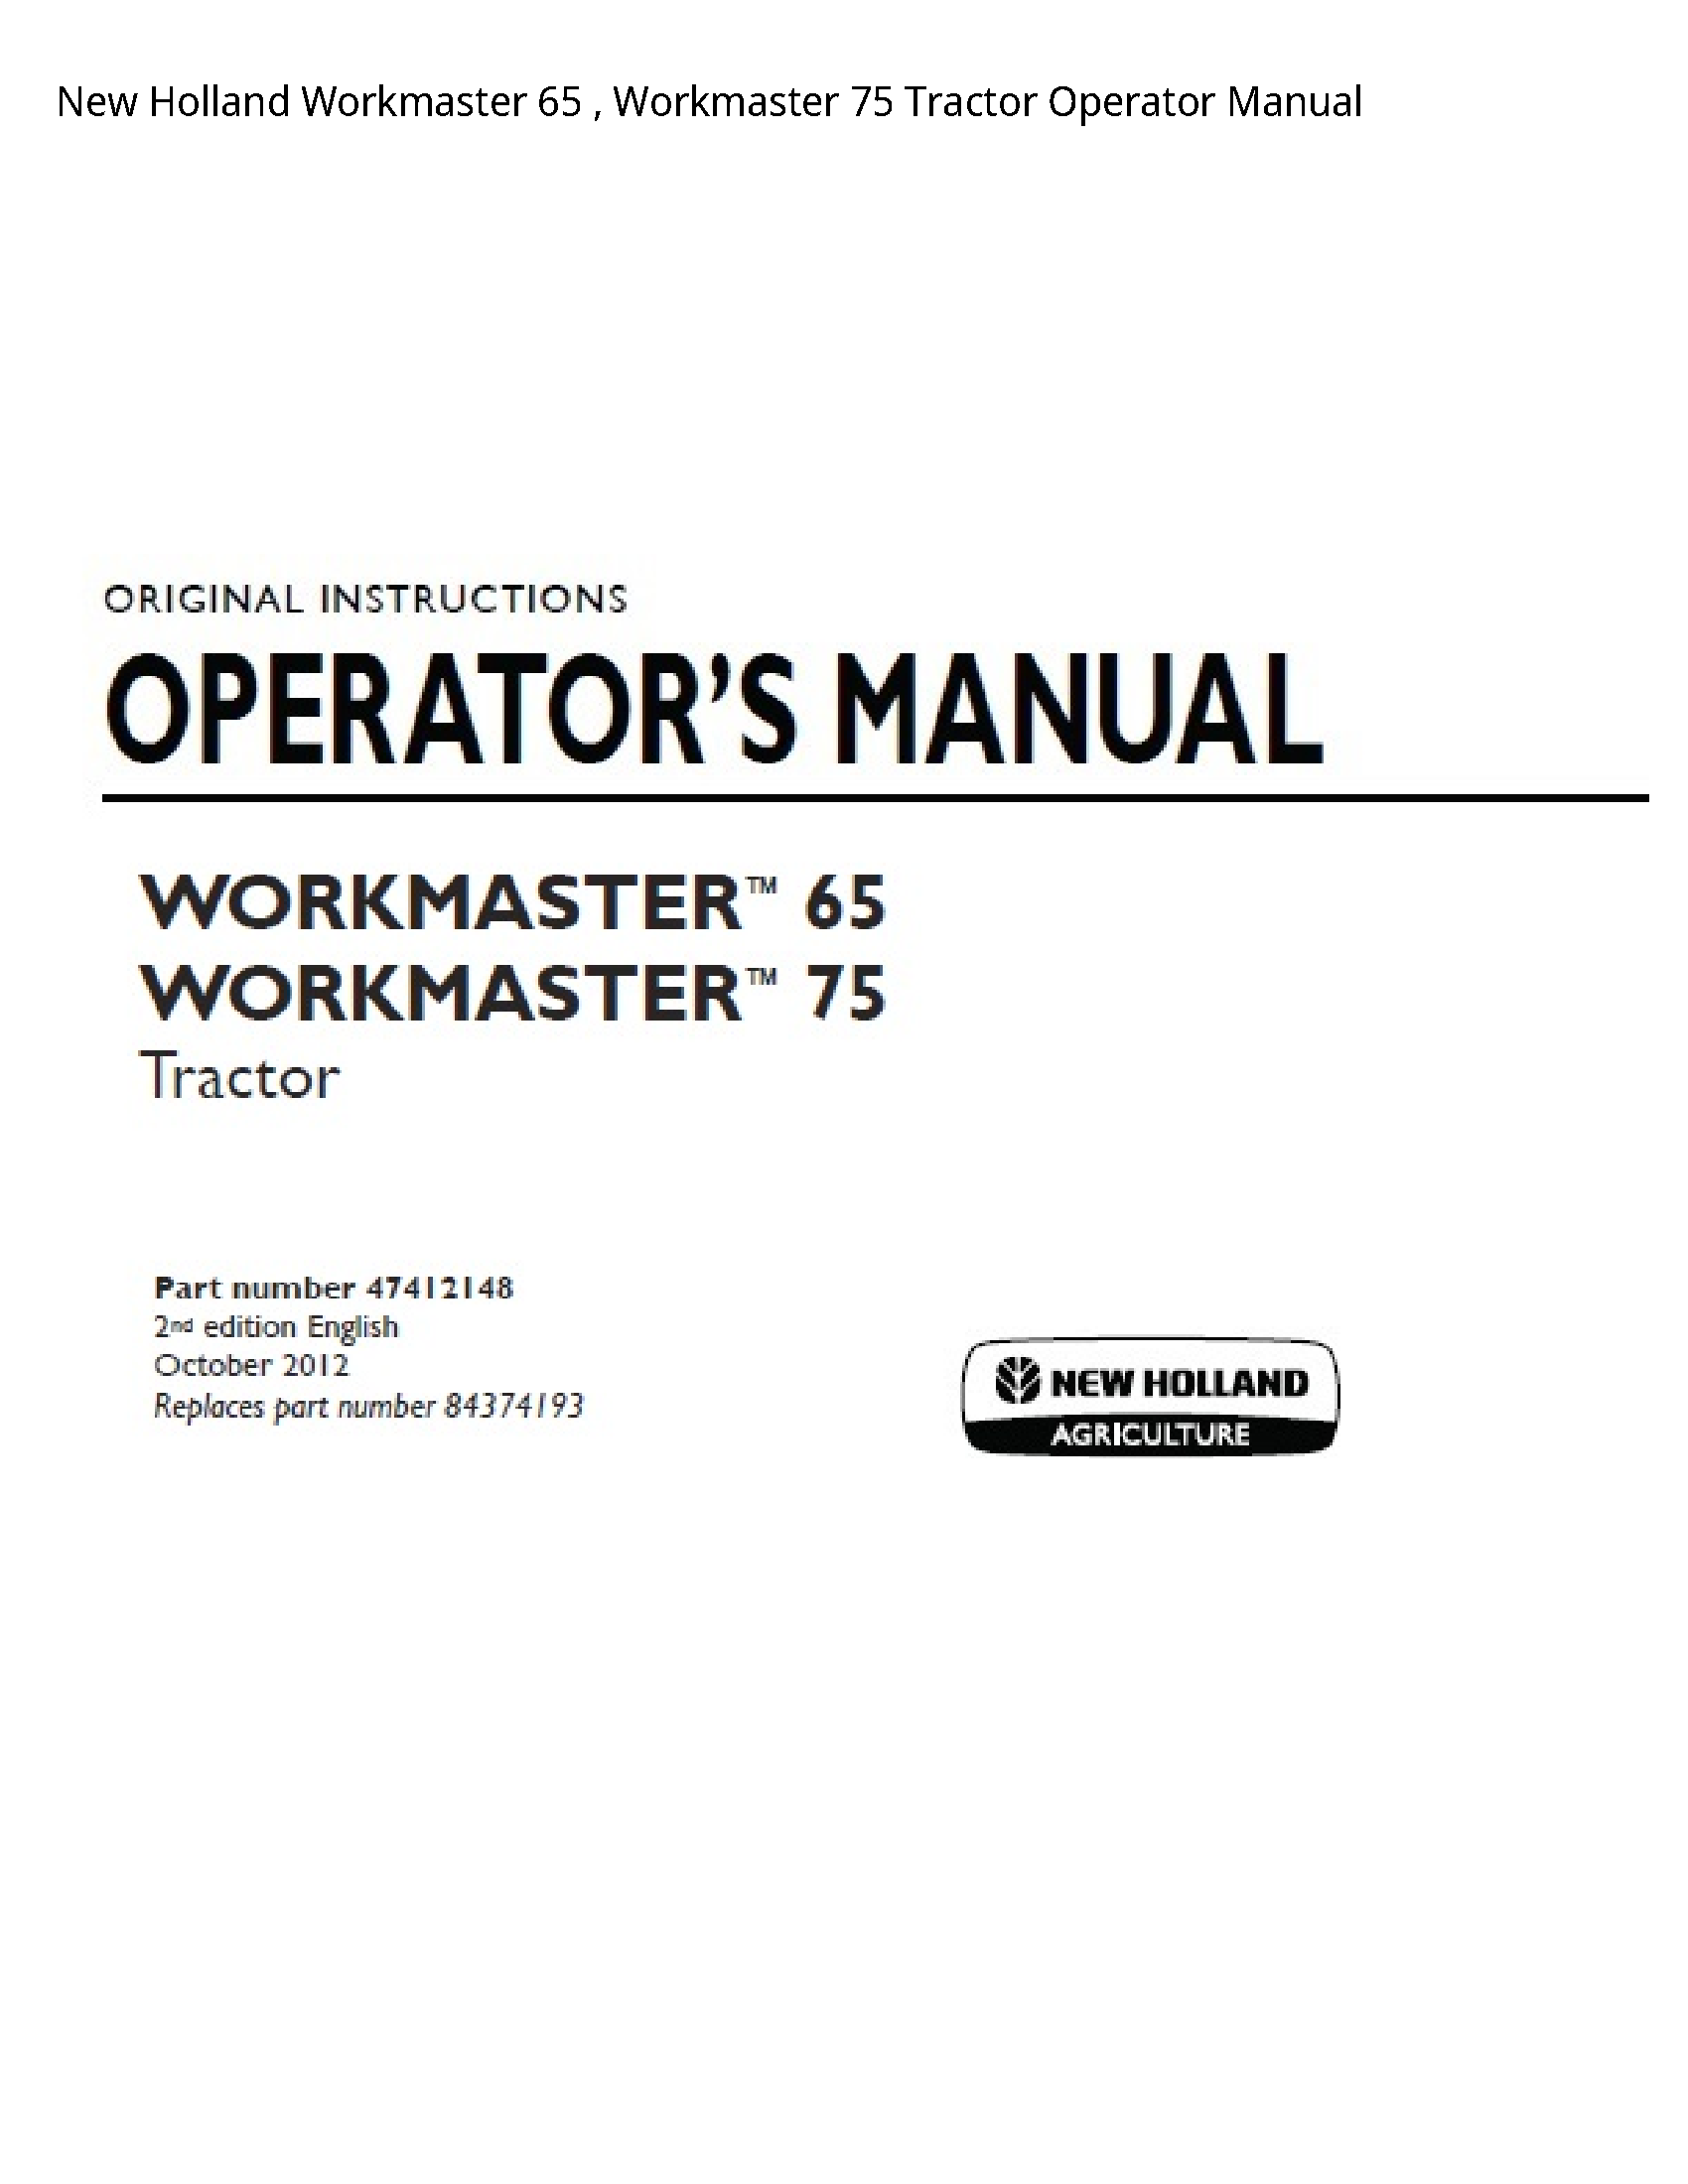 New Holland 65 Workmaster Workmaster Tractor Operator manual